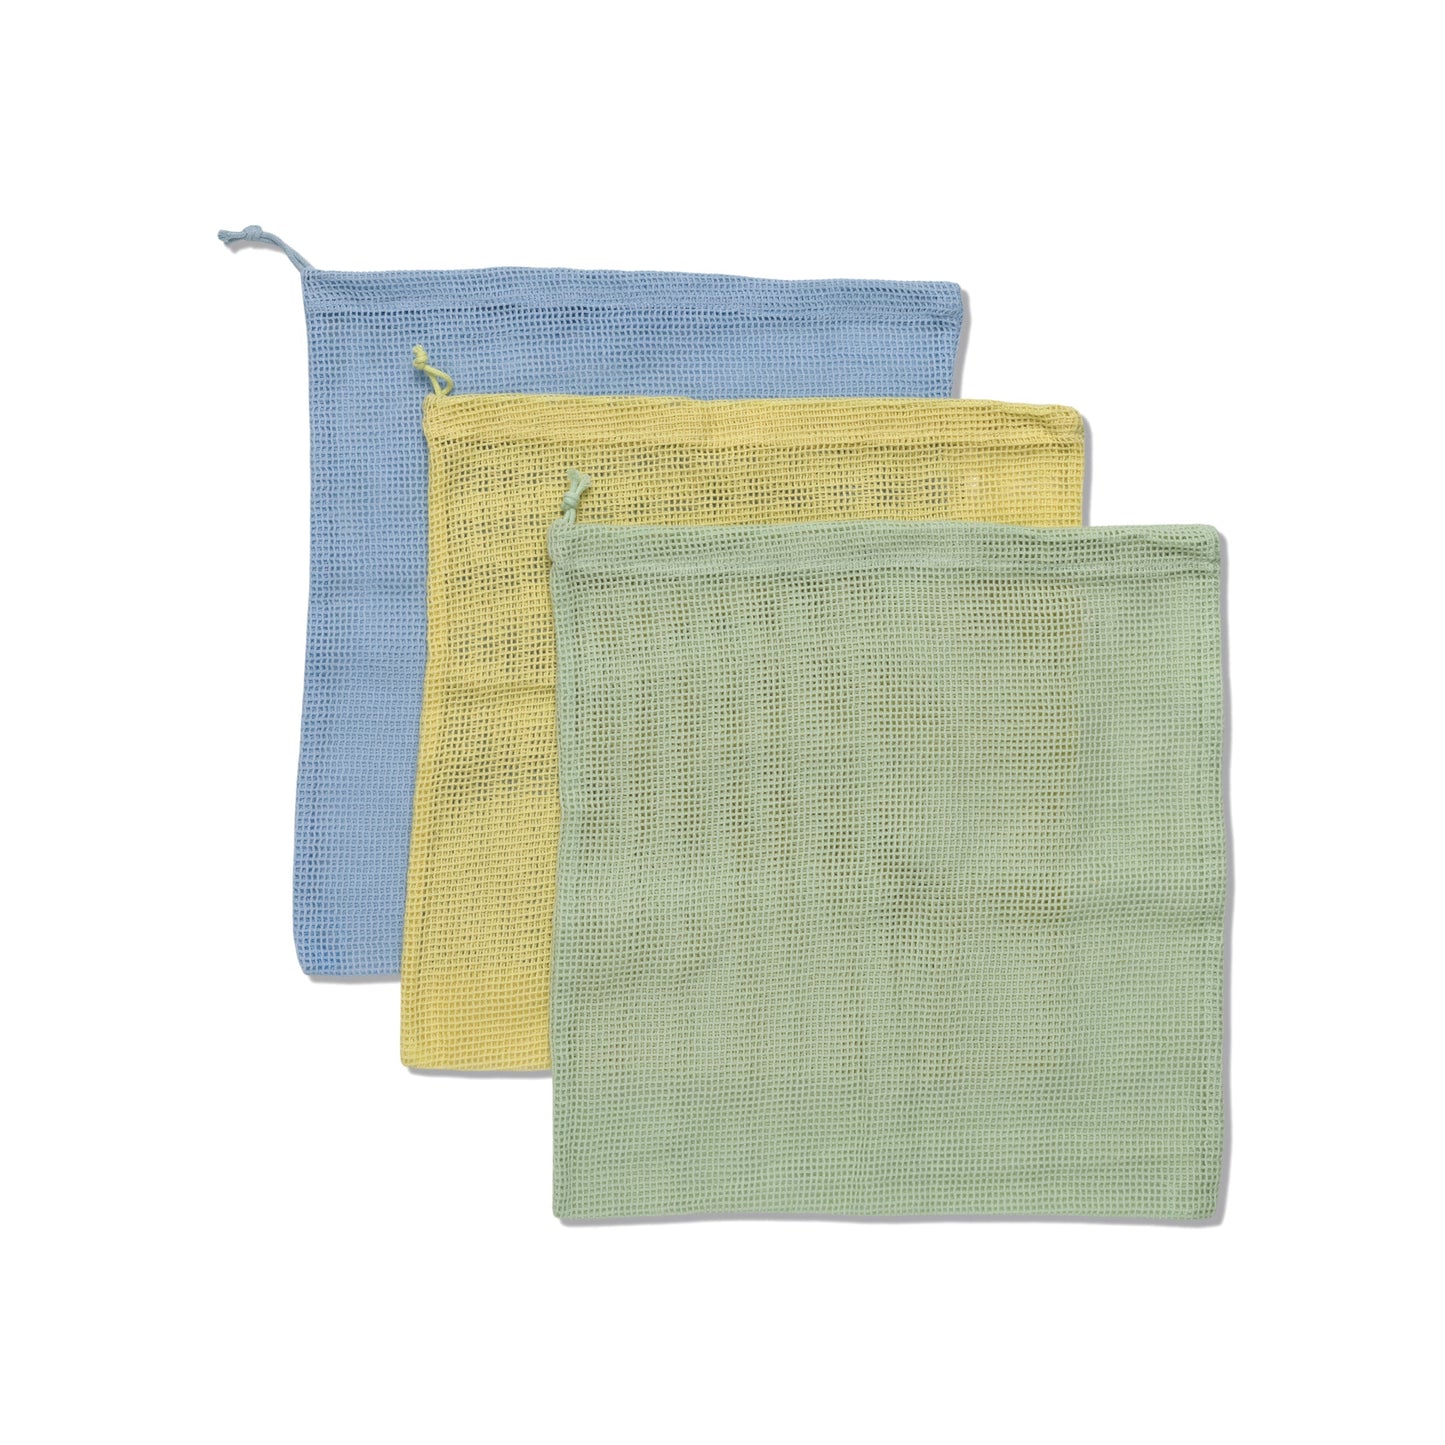 Three market bags in blue, yellow, and green.